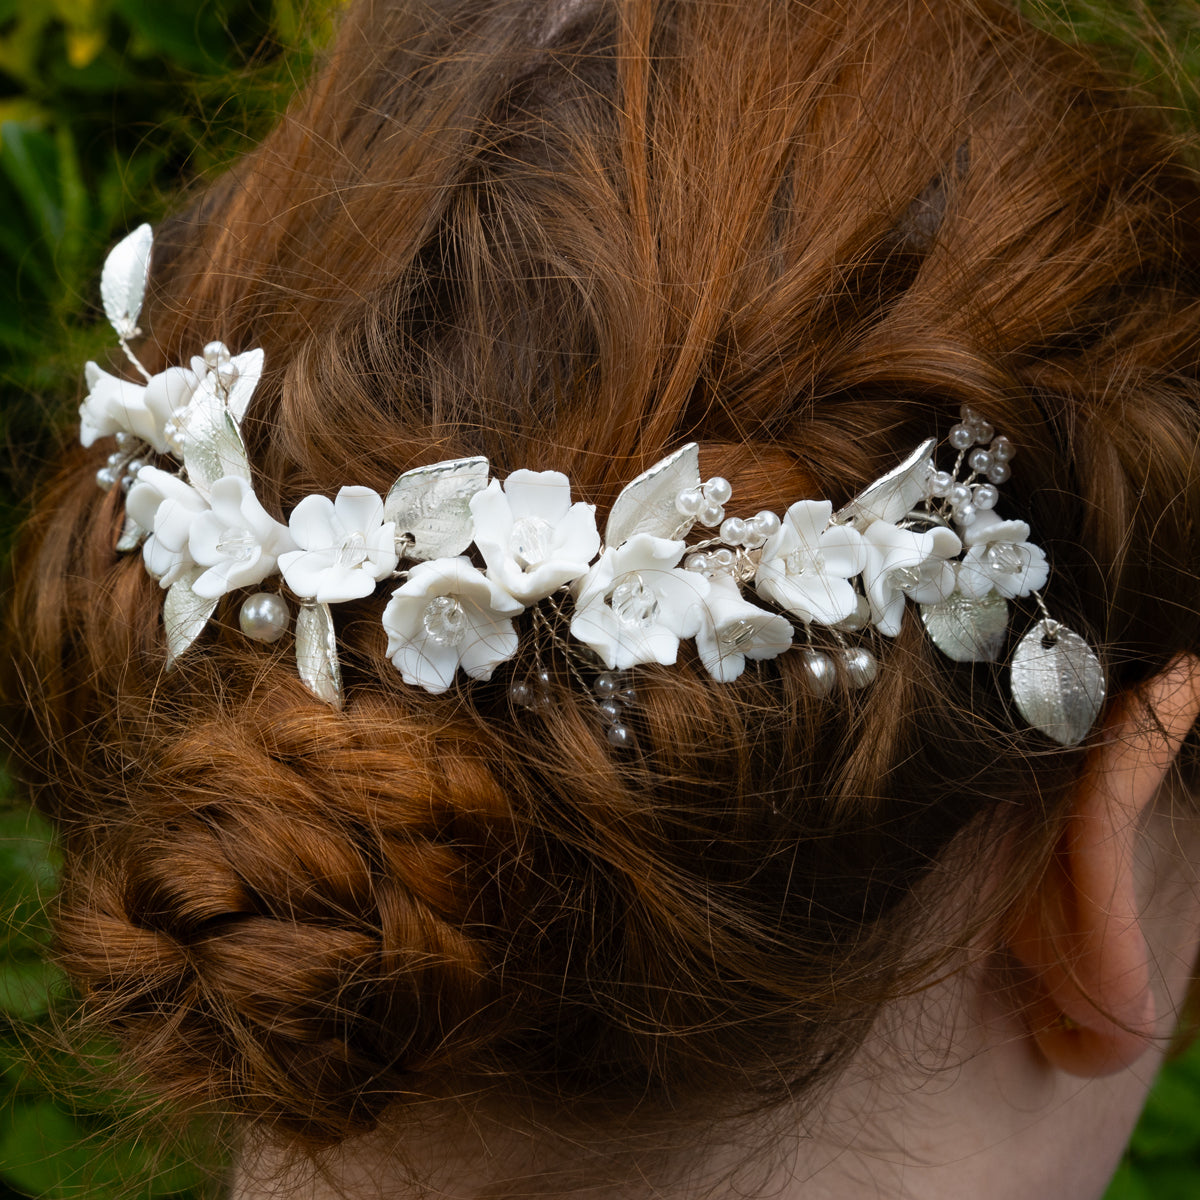 Netherfield Ball Pearl and Flower Hair Comb Accessory